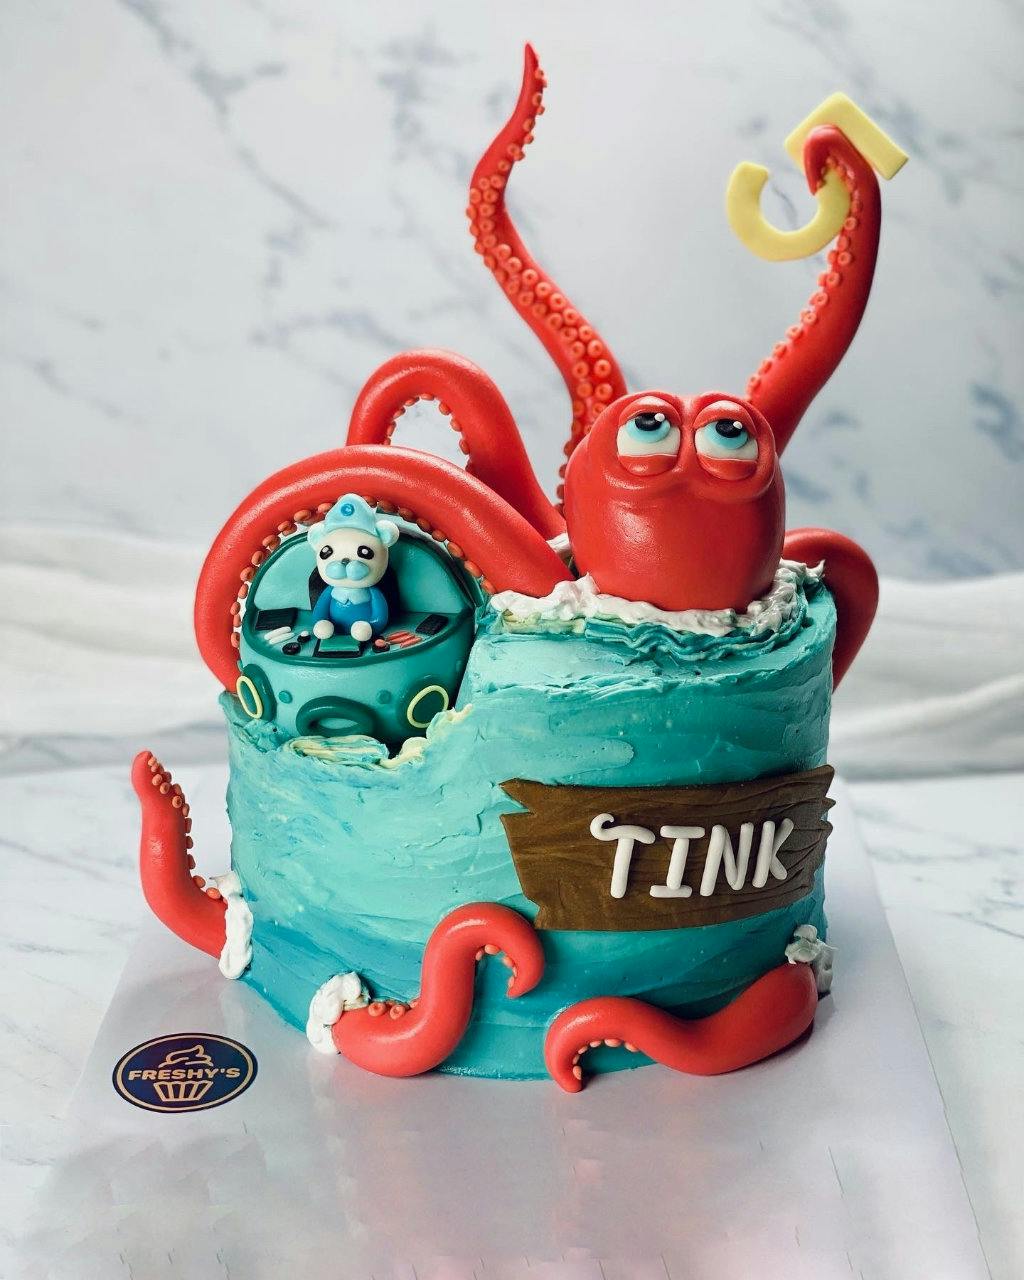 100% edible, sculpted kraken birthday cake with butter cream icing